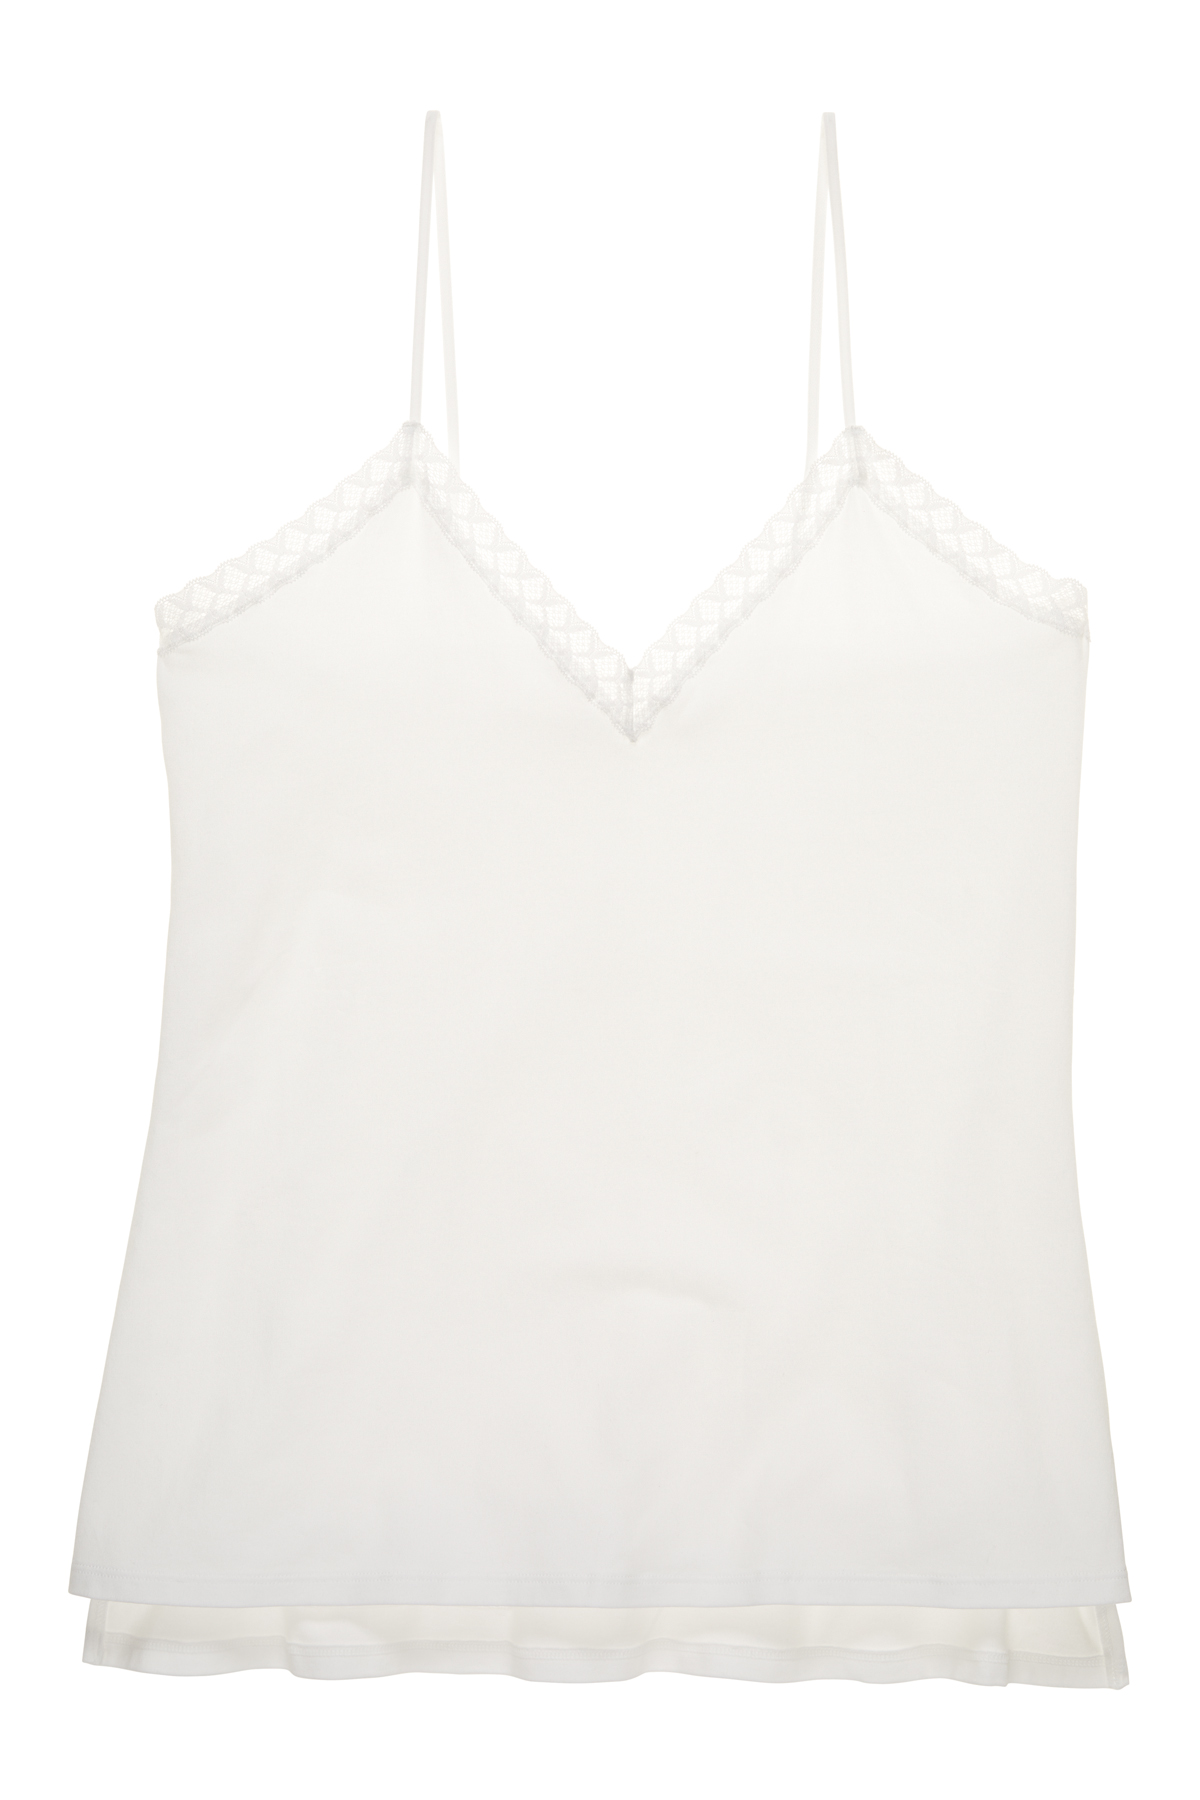 Only Hearts Org Cttn w/ Lace Cami in White- Bliss Boutiques